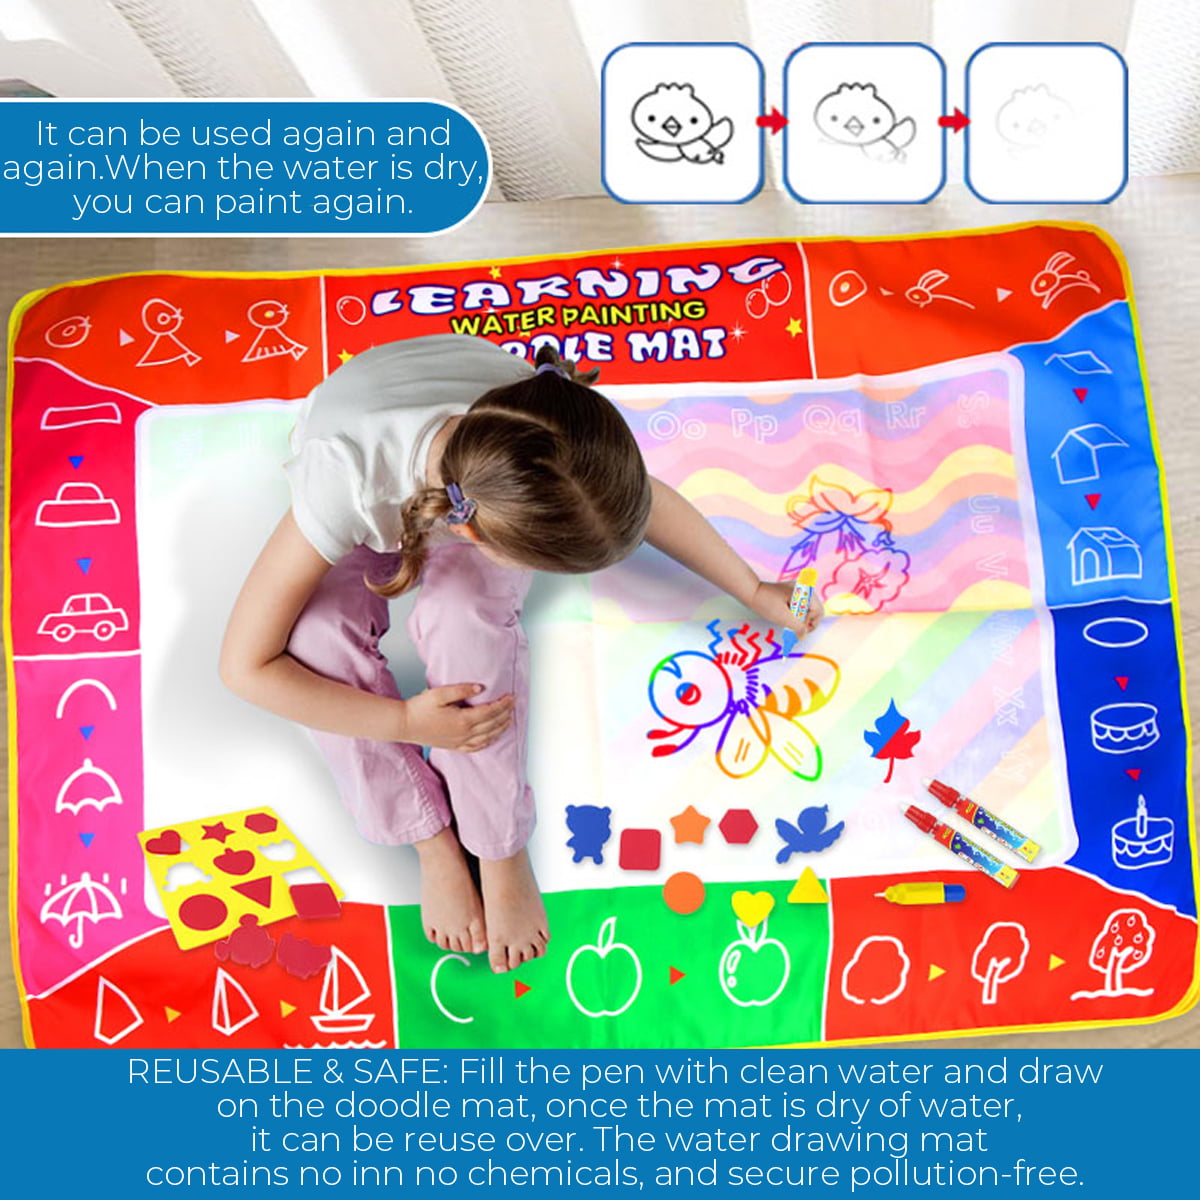 Aqua Magic Doodle Drawing Mat Water Drawing Coloring Mat 47 X 35 Reusable Water Coloring Writing Painting Board With 12 Accessories Educational Toys Gifts For Kids Toddlers 3 4 5 6